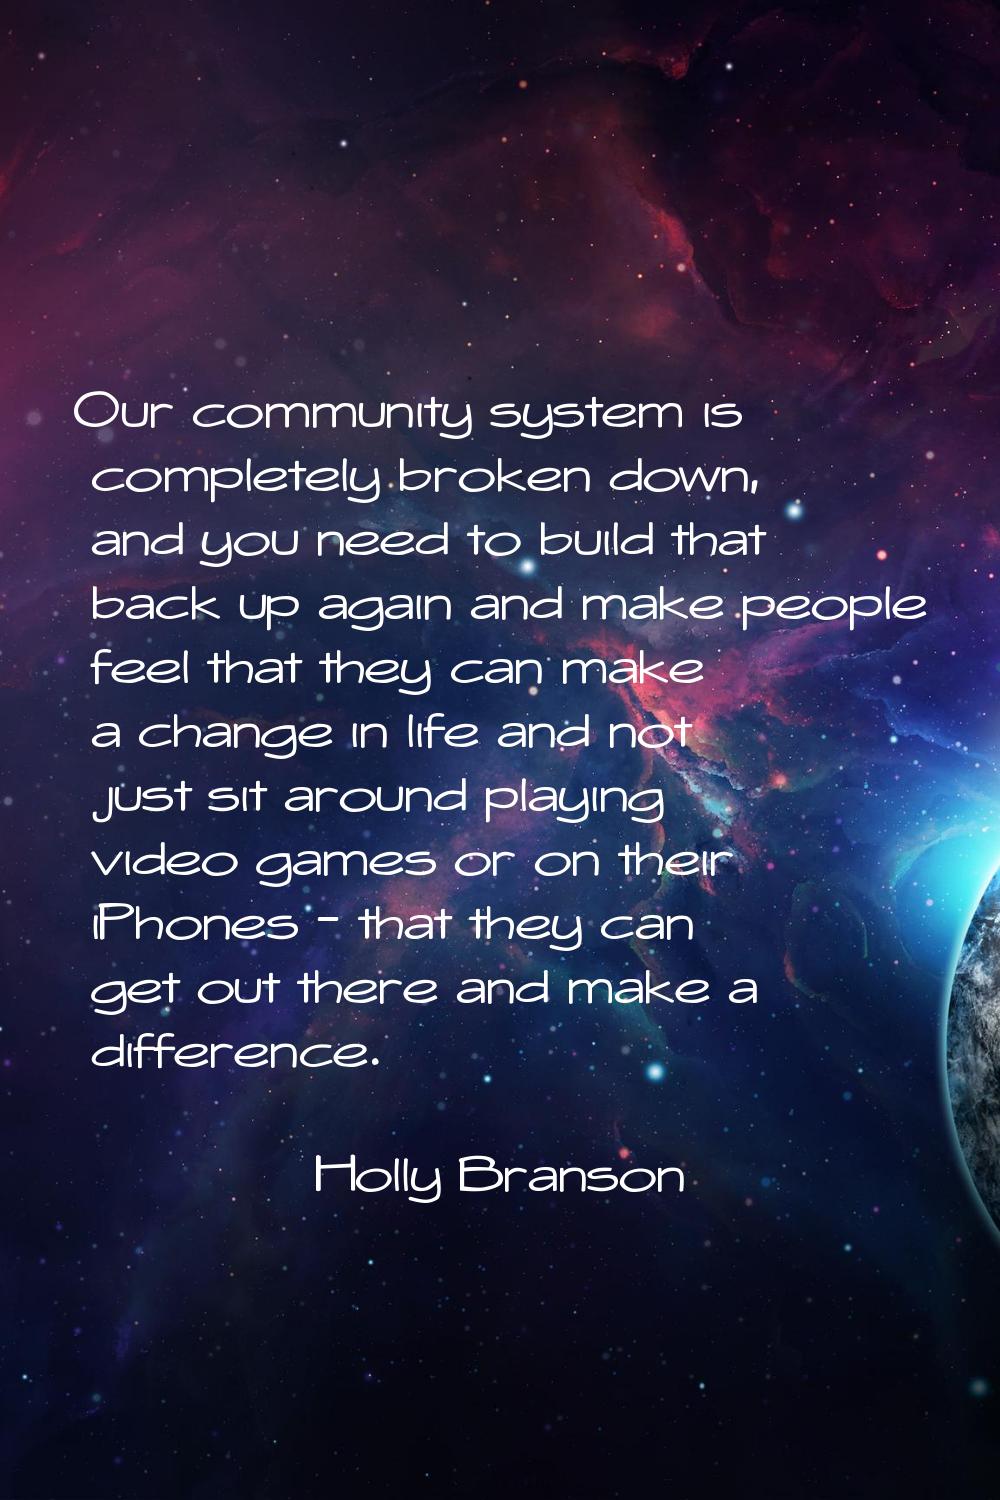 Our community system is completely broken down, and you need to build that back up again and make p